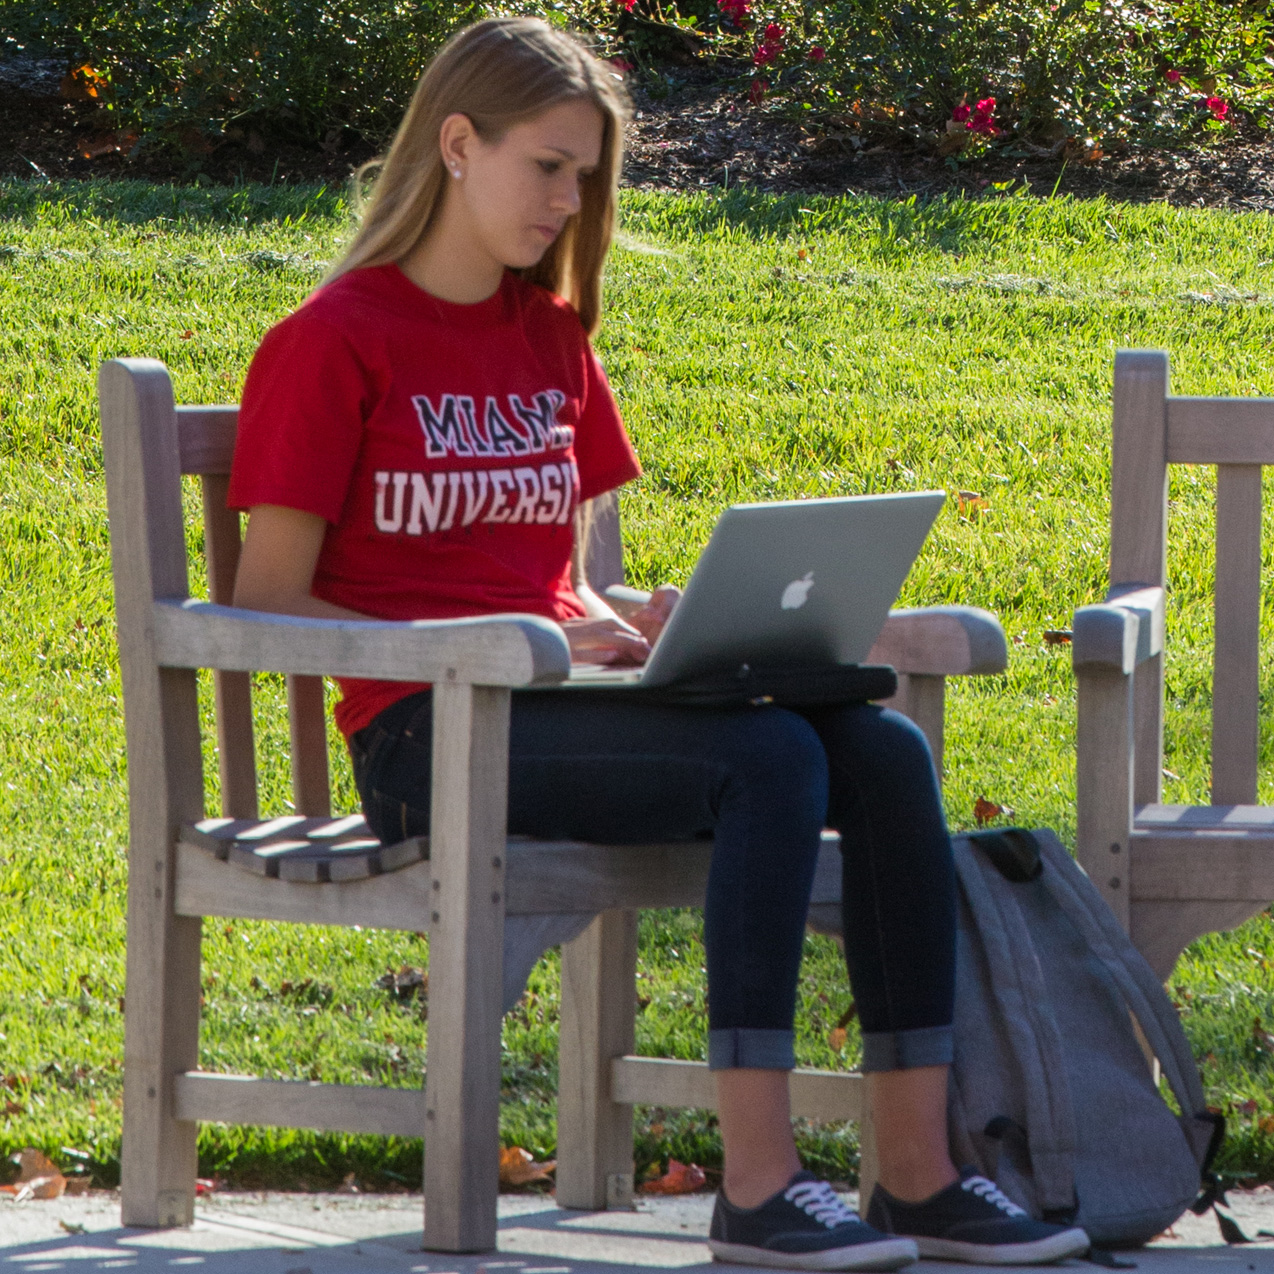 Female student with a red Miami sweatshirt on sitting in a chair outside while working on her laptop.